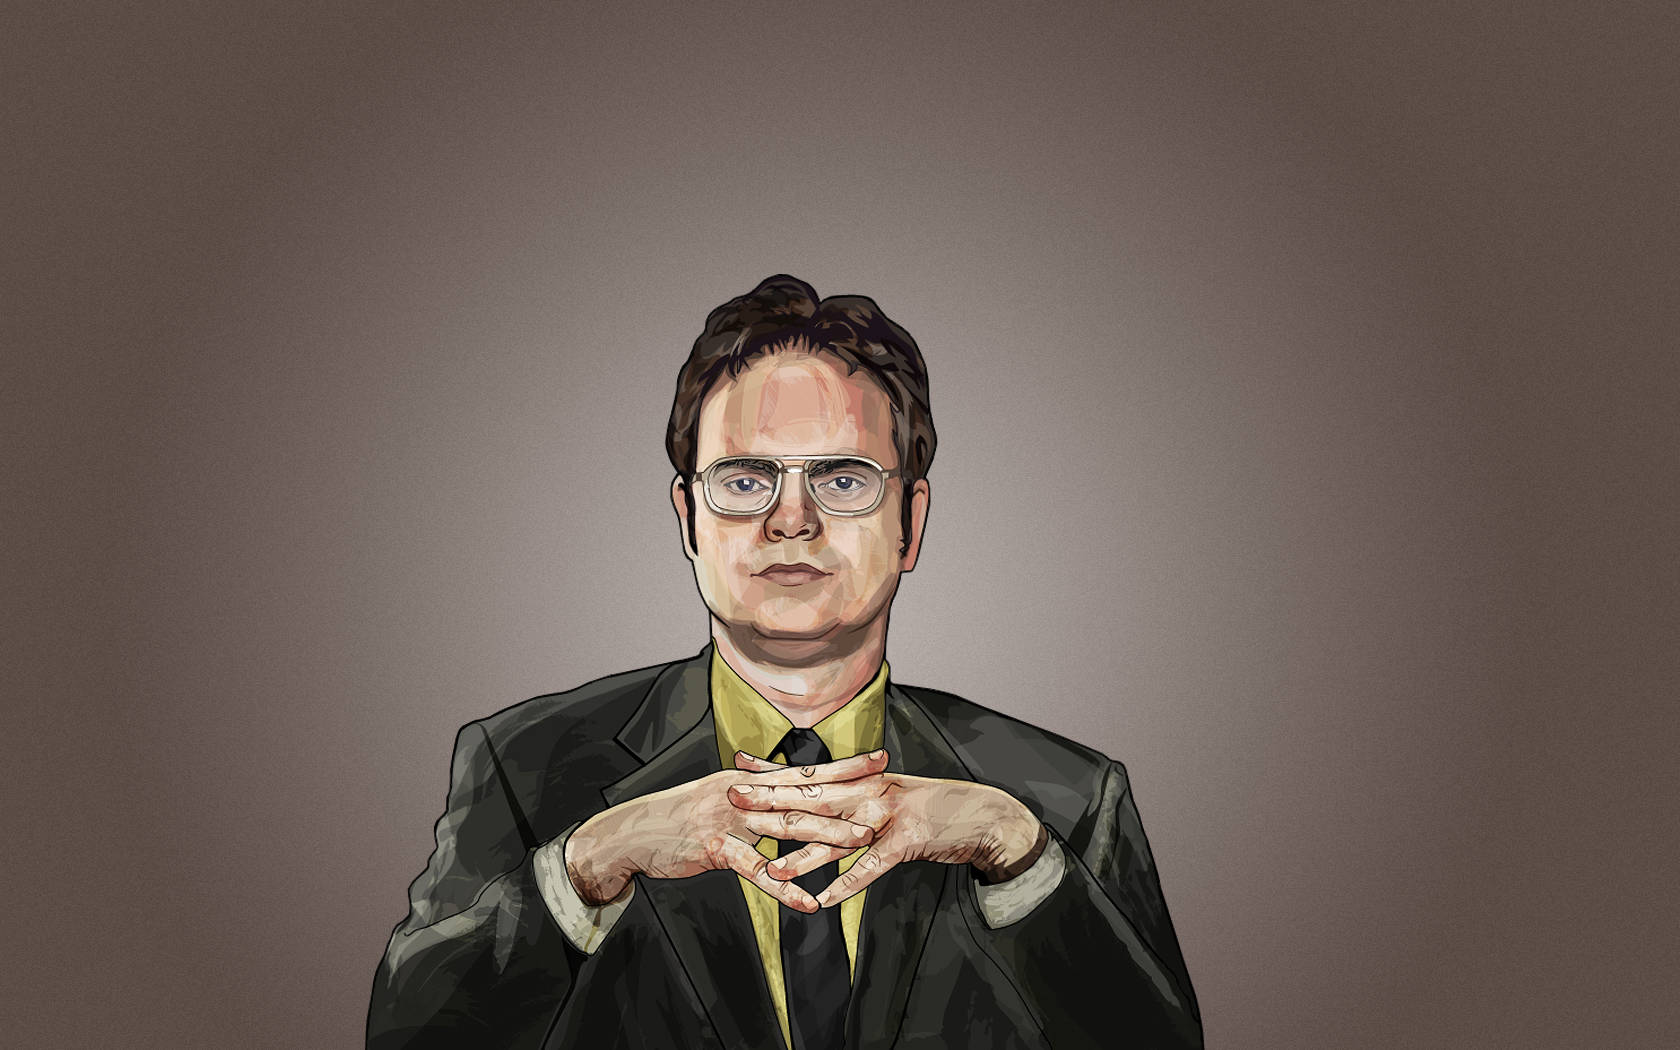 The Office Us Dwight Schrute Wallpaper